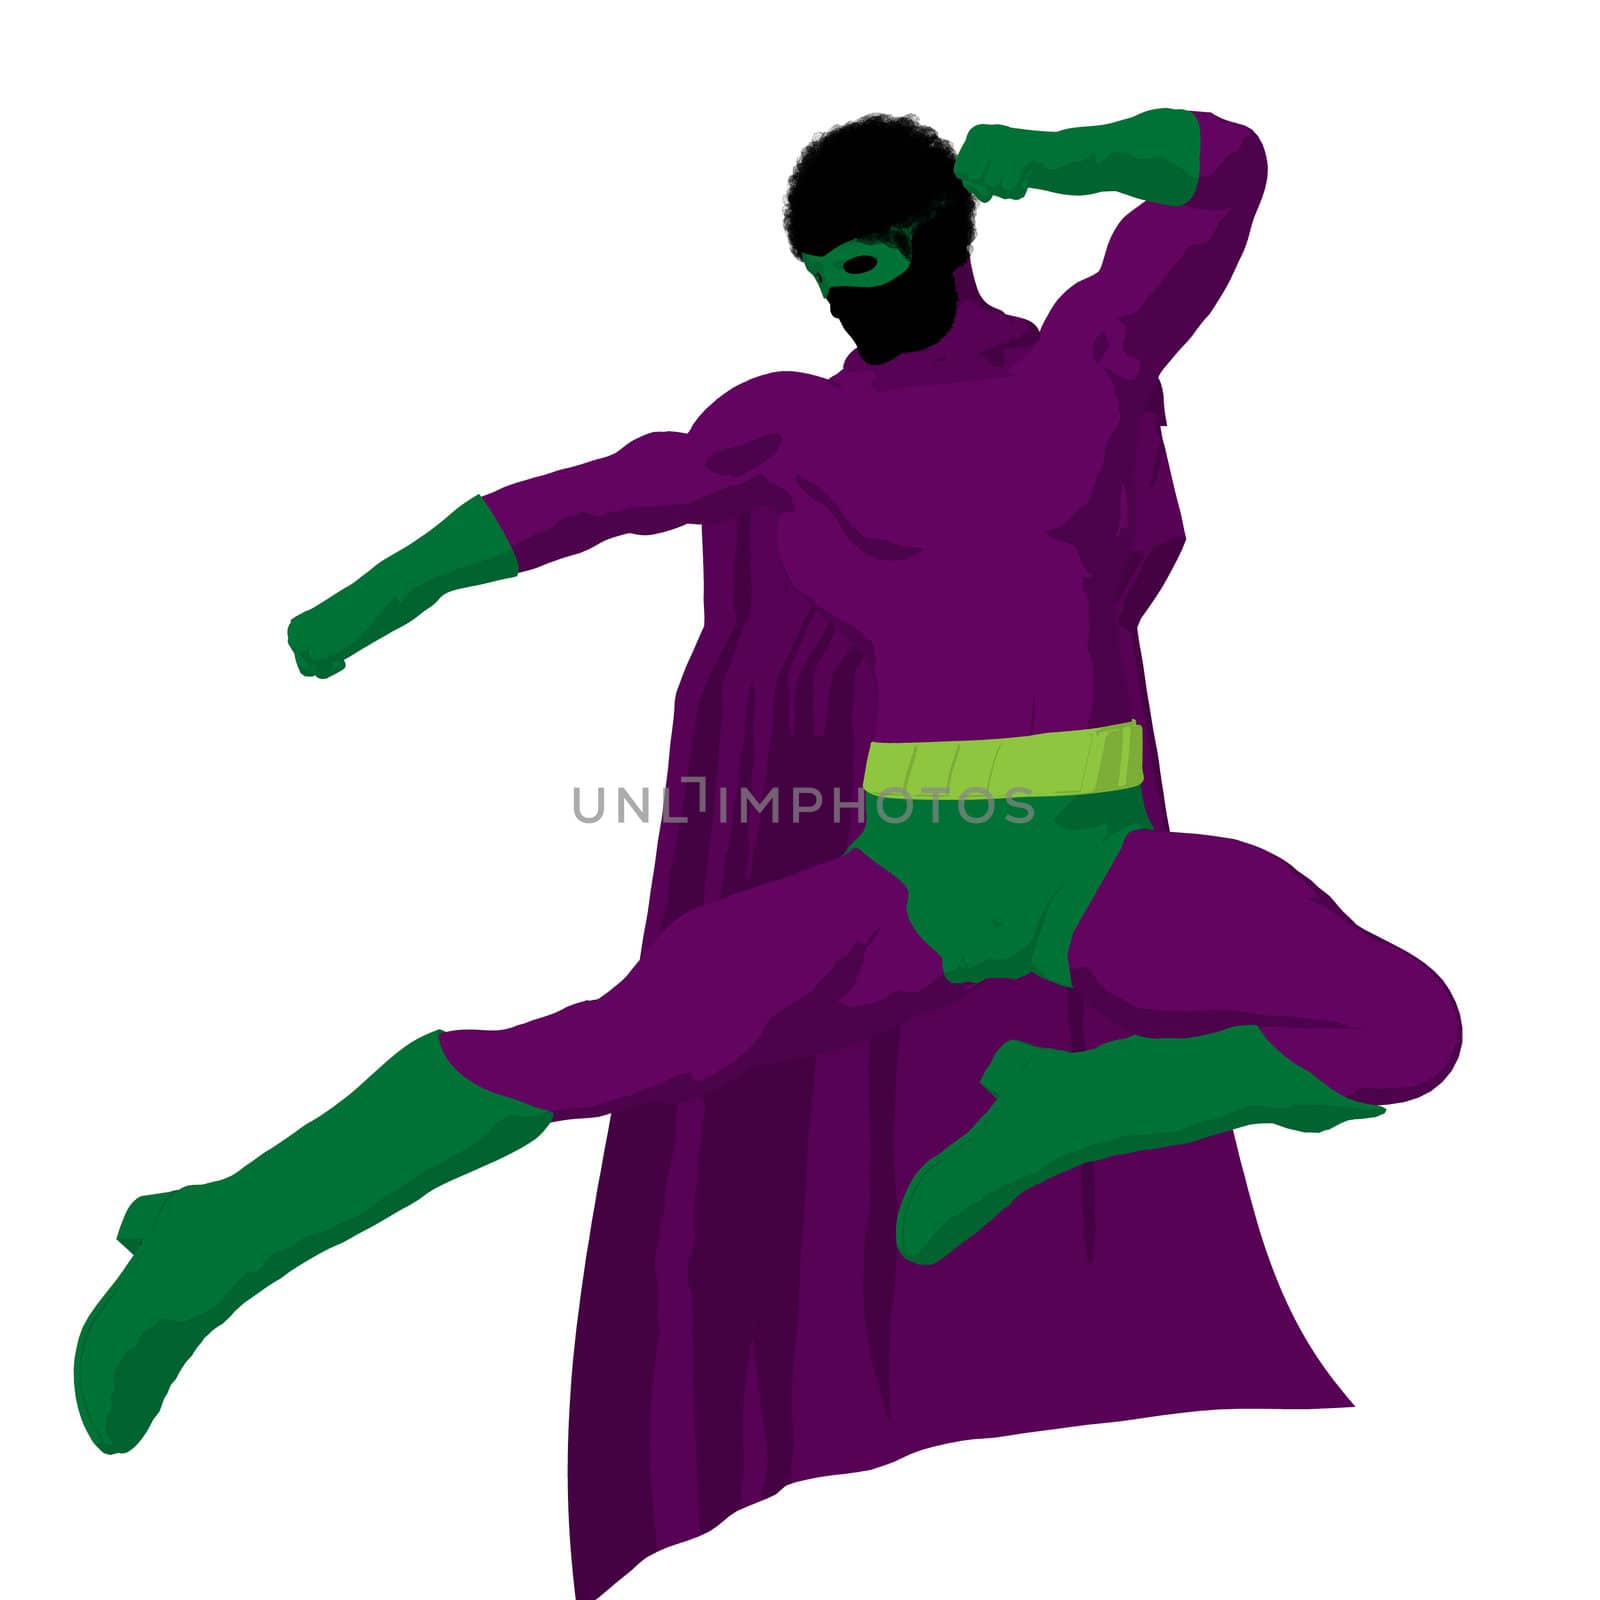 African American Super Hero Illustration Silhouette by kathygold